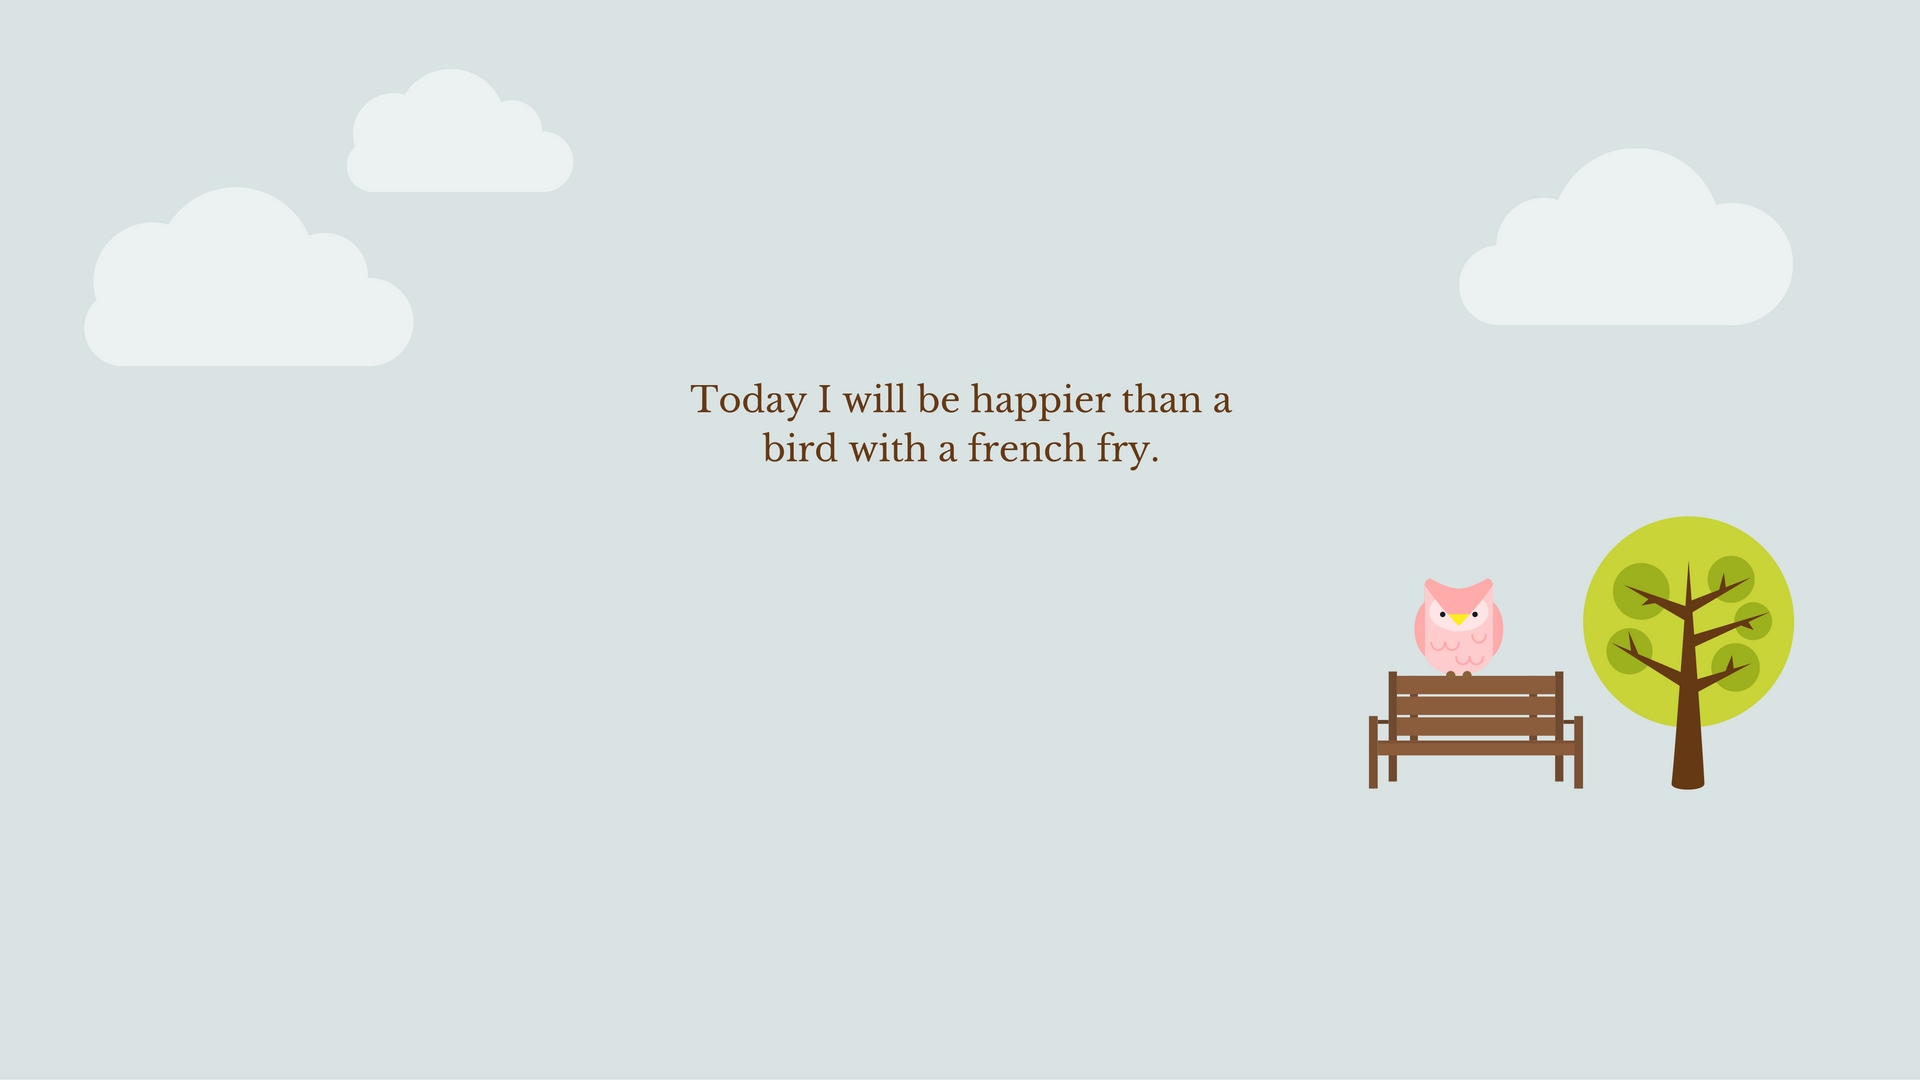 Today I will be happier than a bird with a french fry.